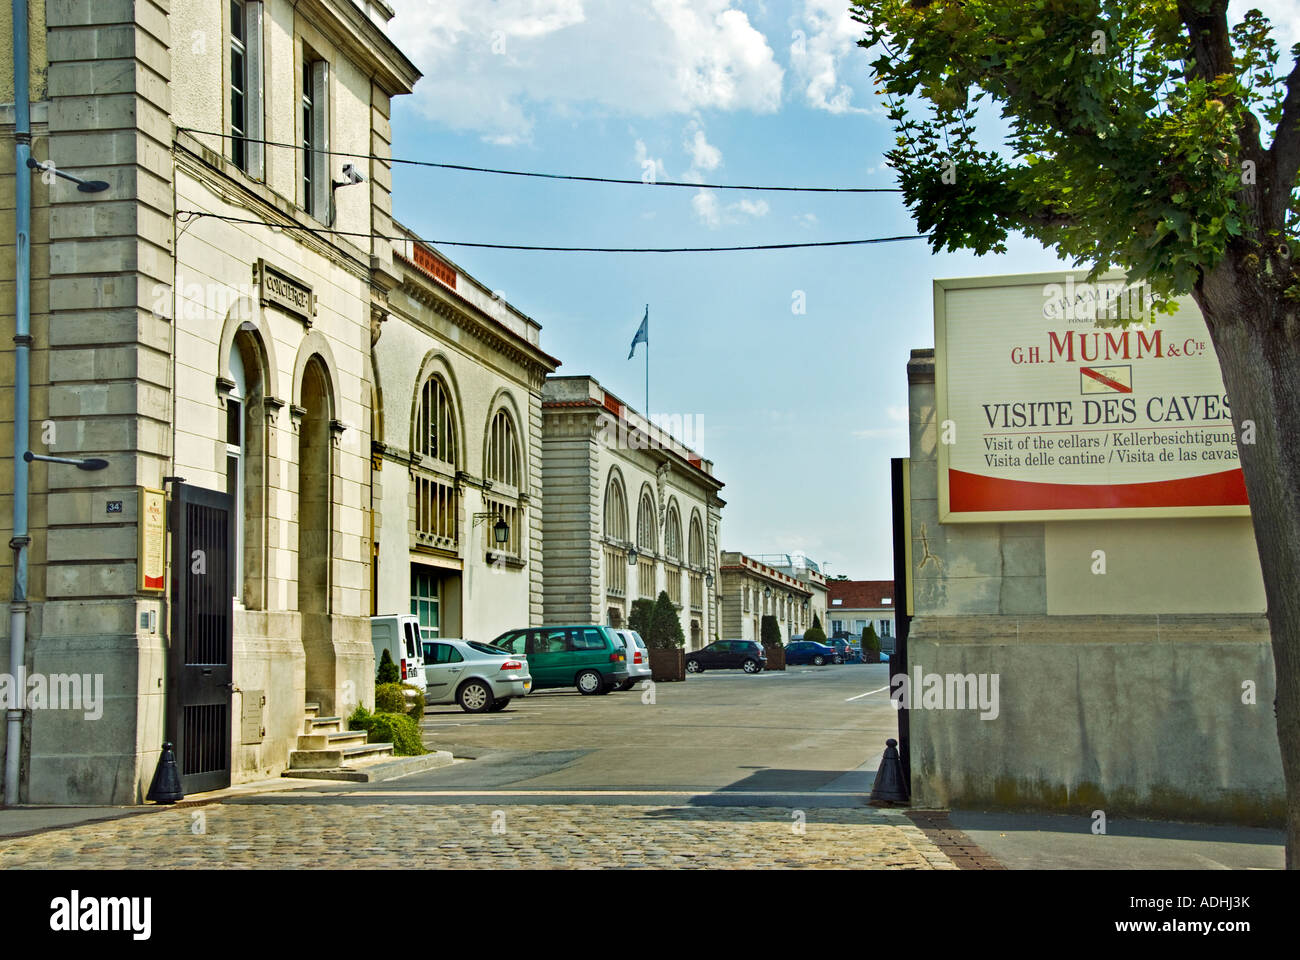 Reims, France, Champagne Company Building "G.H Mumm Cie" Front with  "Corporative Sign" Entrance to Site "Cave Visit" cave tourism Stock Photo -  Alamy